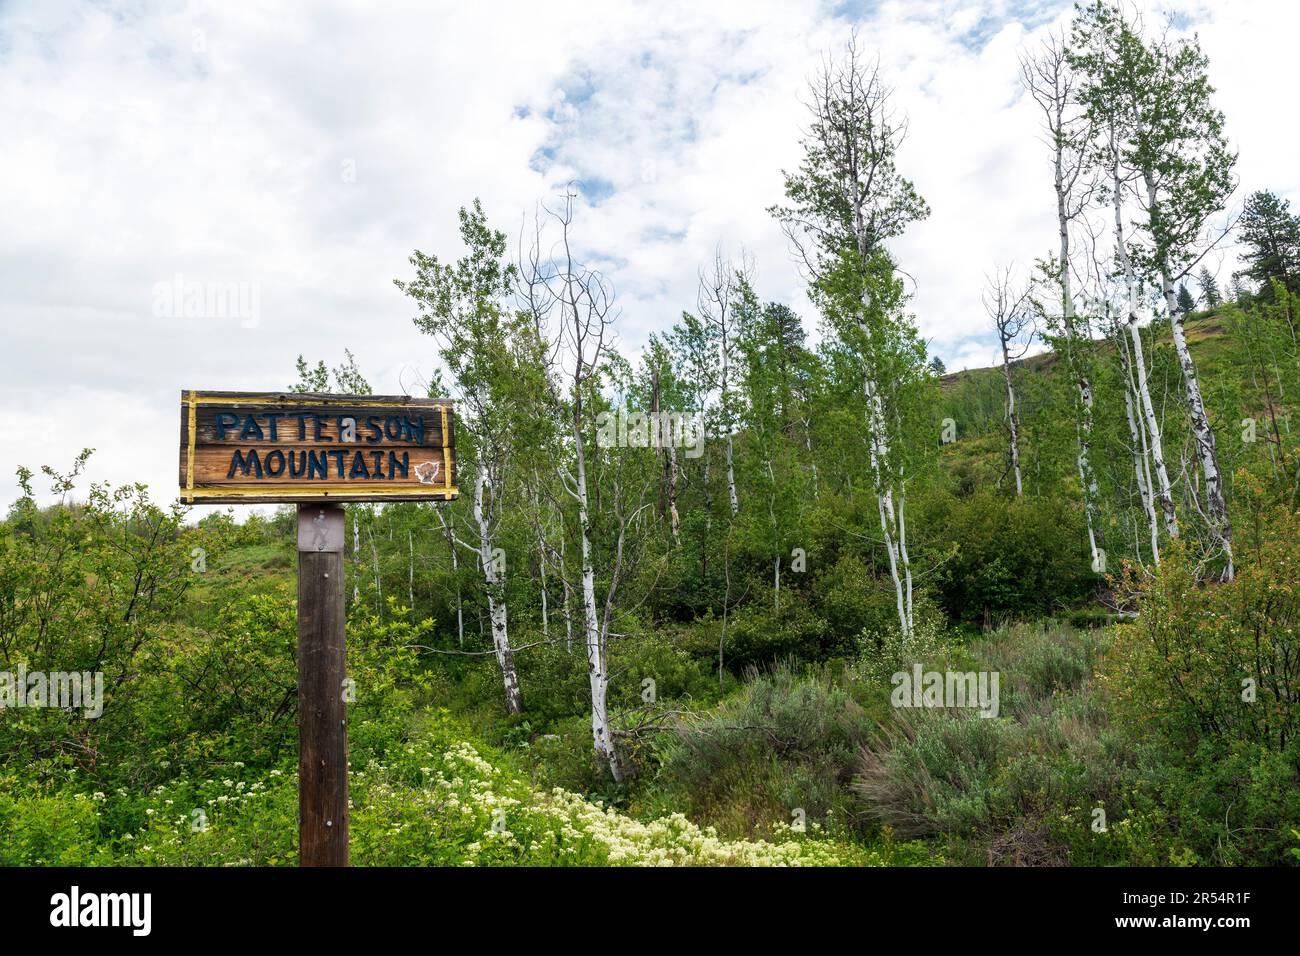 A wooden sign indicating Patterson Mountain is surrounded by greenery and young aspen trees near Winthrop, Washington, USA. Stock Photo